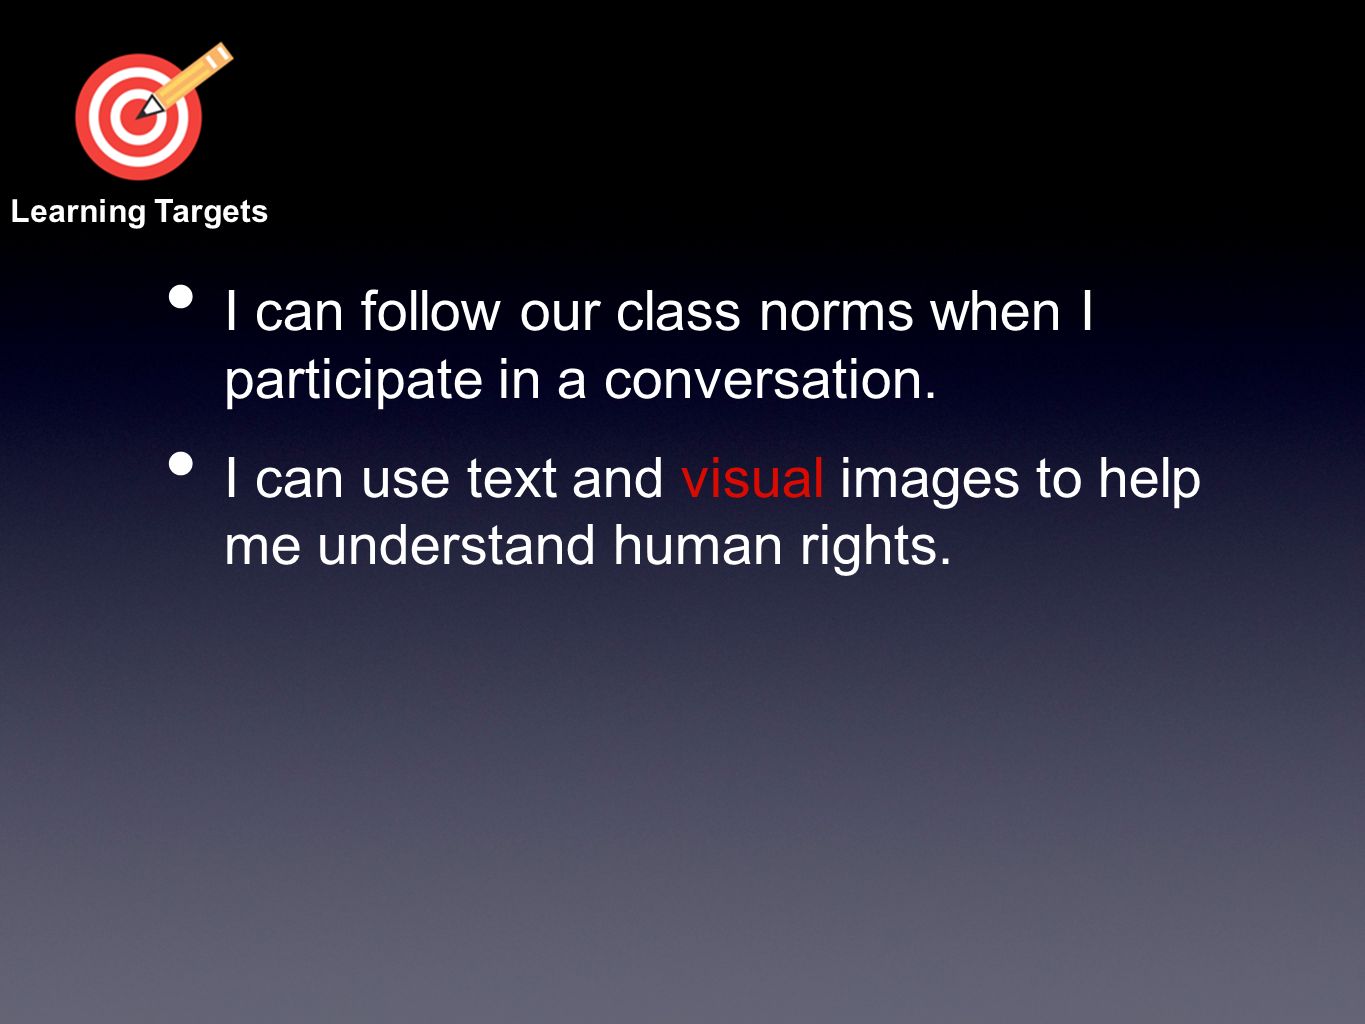 I can follow our class norms when I participate in a conversation.